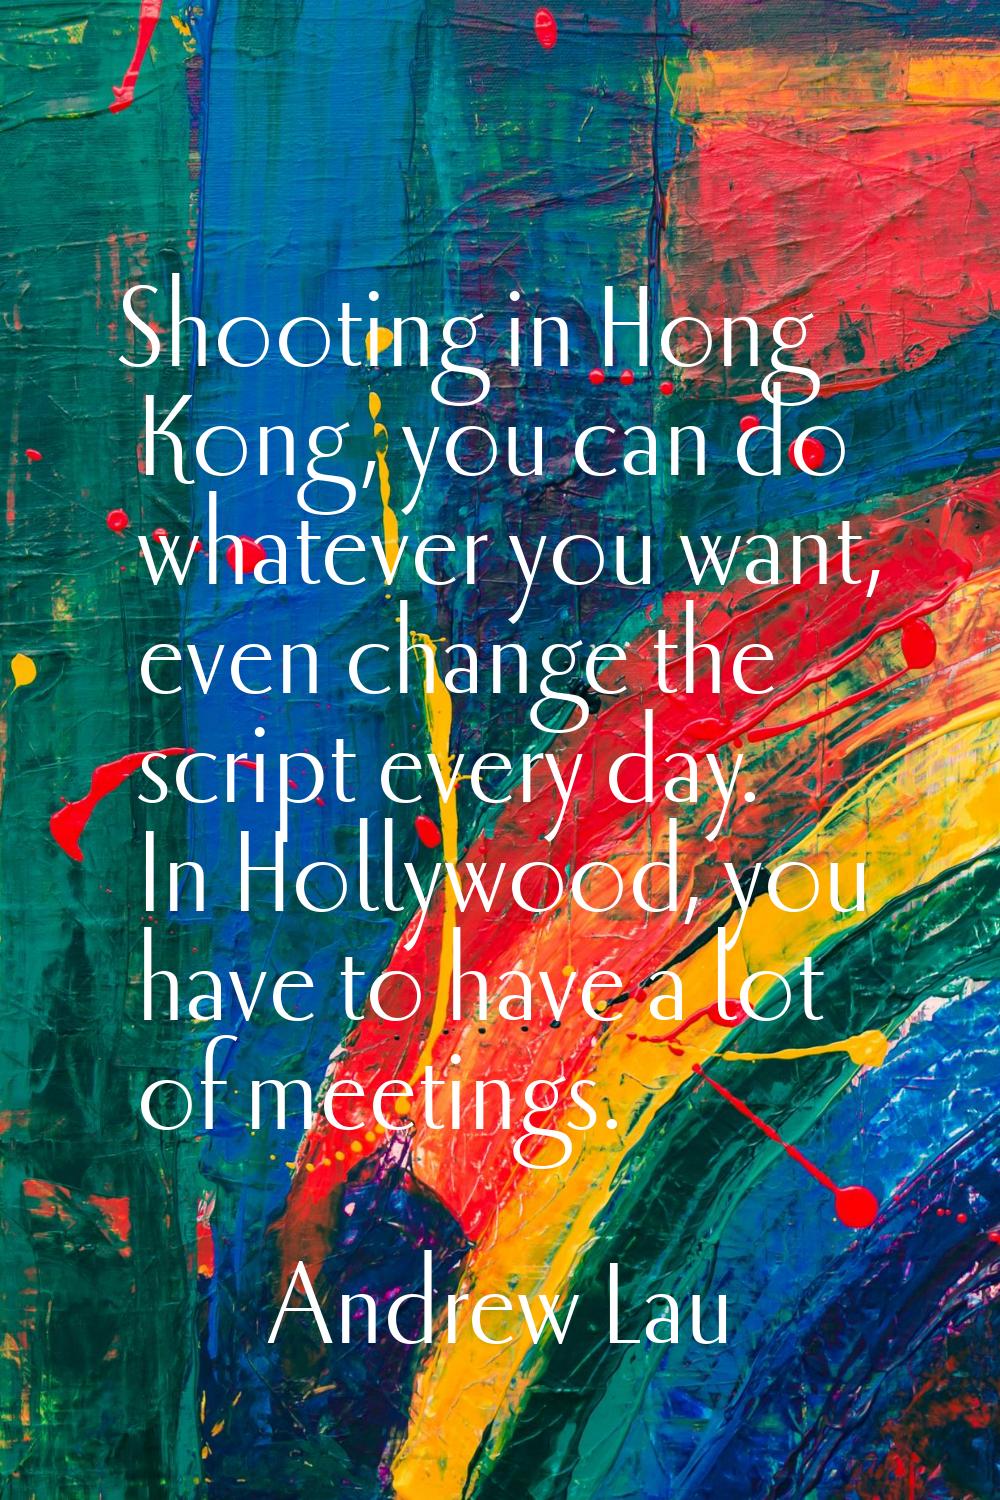 Shooting in Hong Kong, you can do whatever you want, even change the script every day. In Hollywood